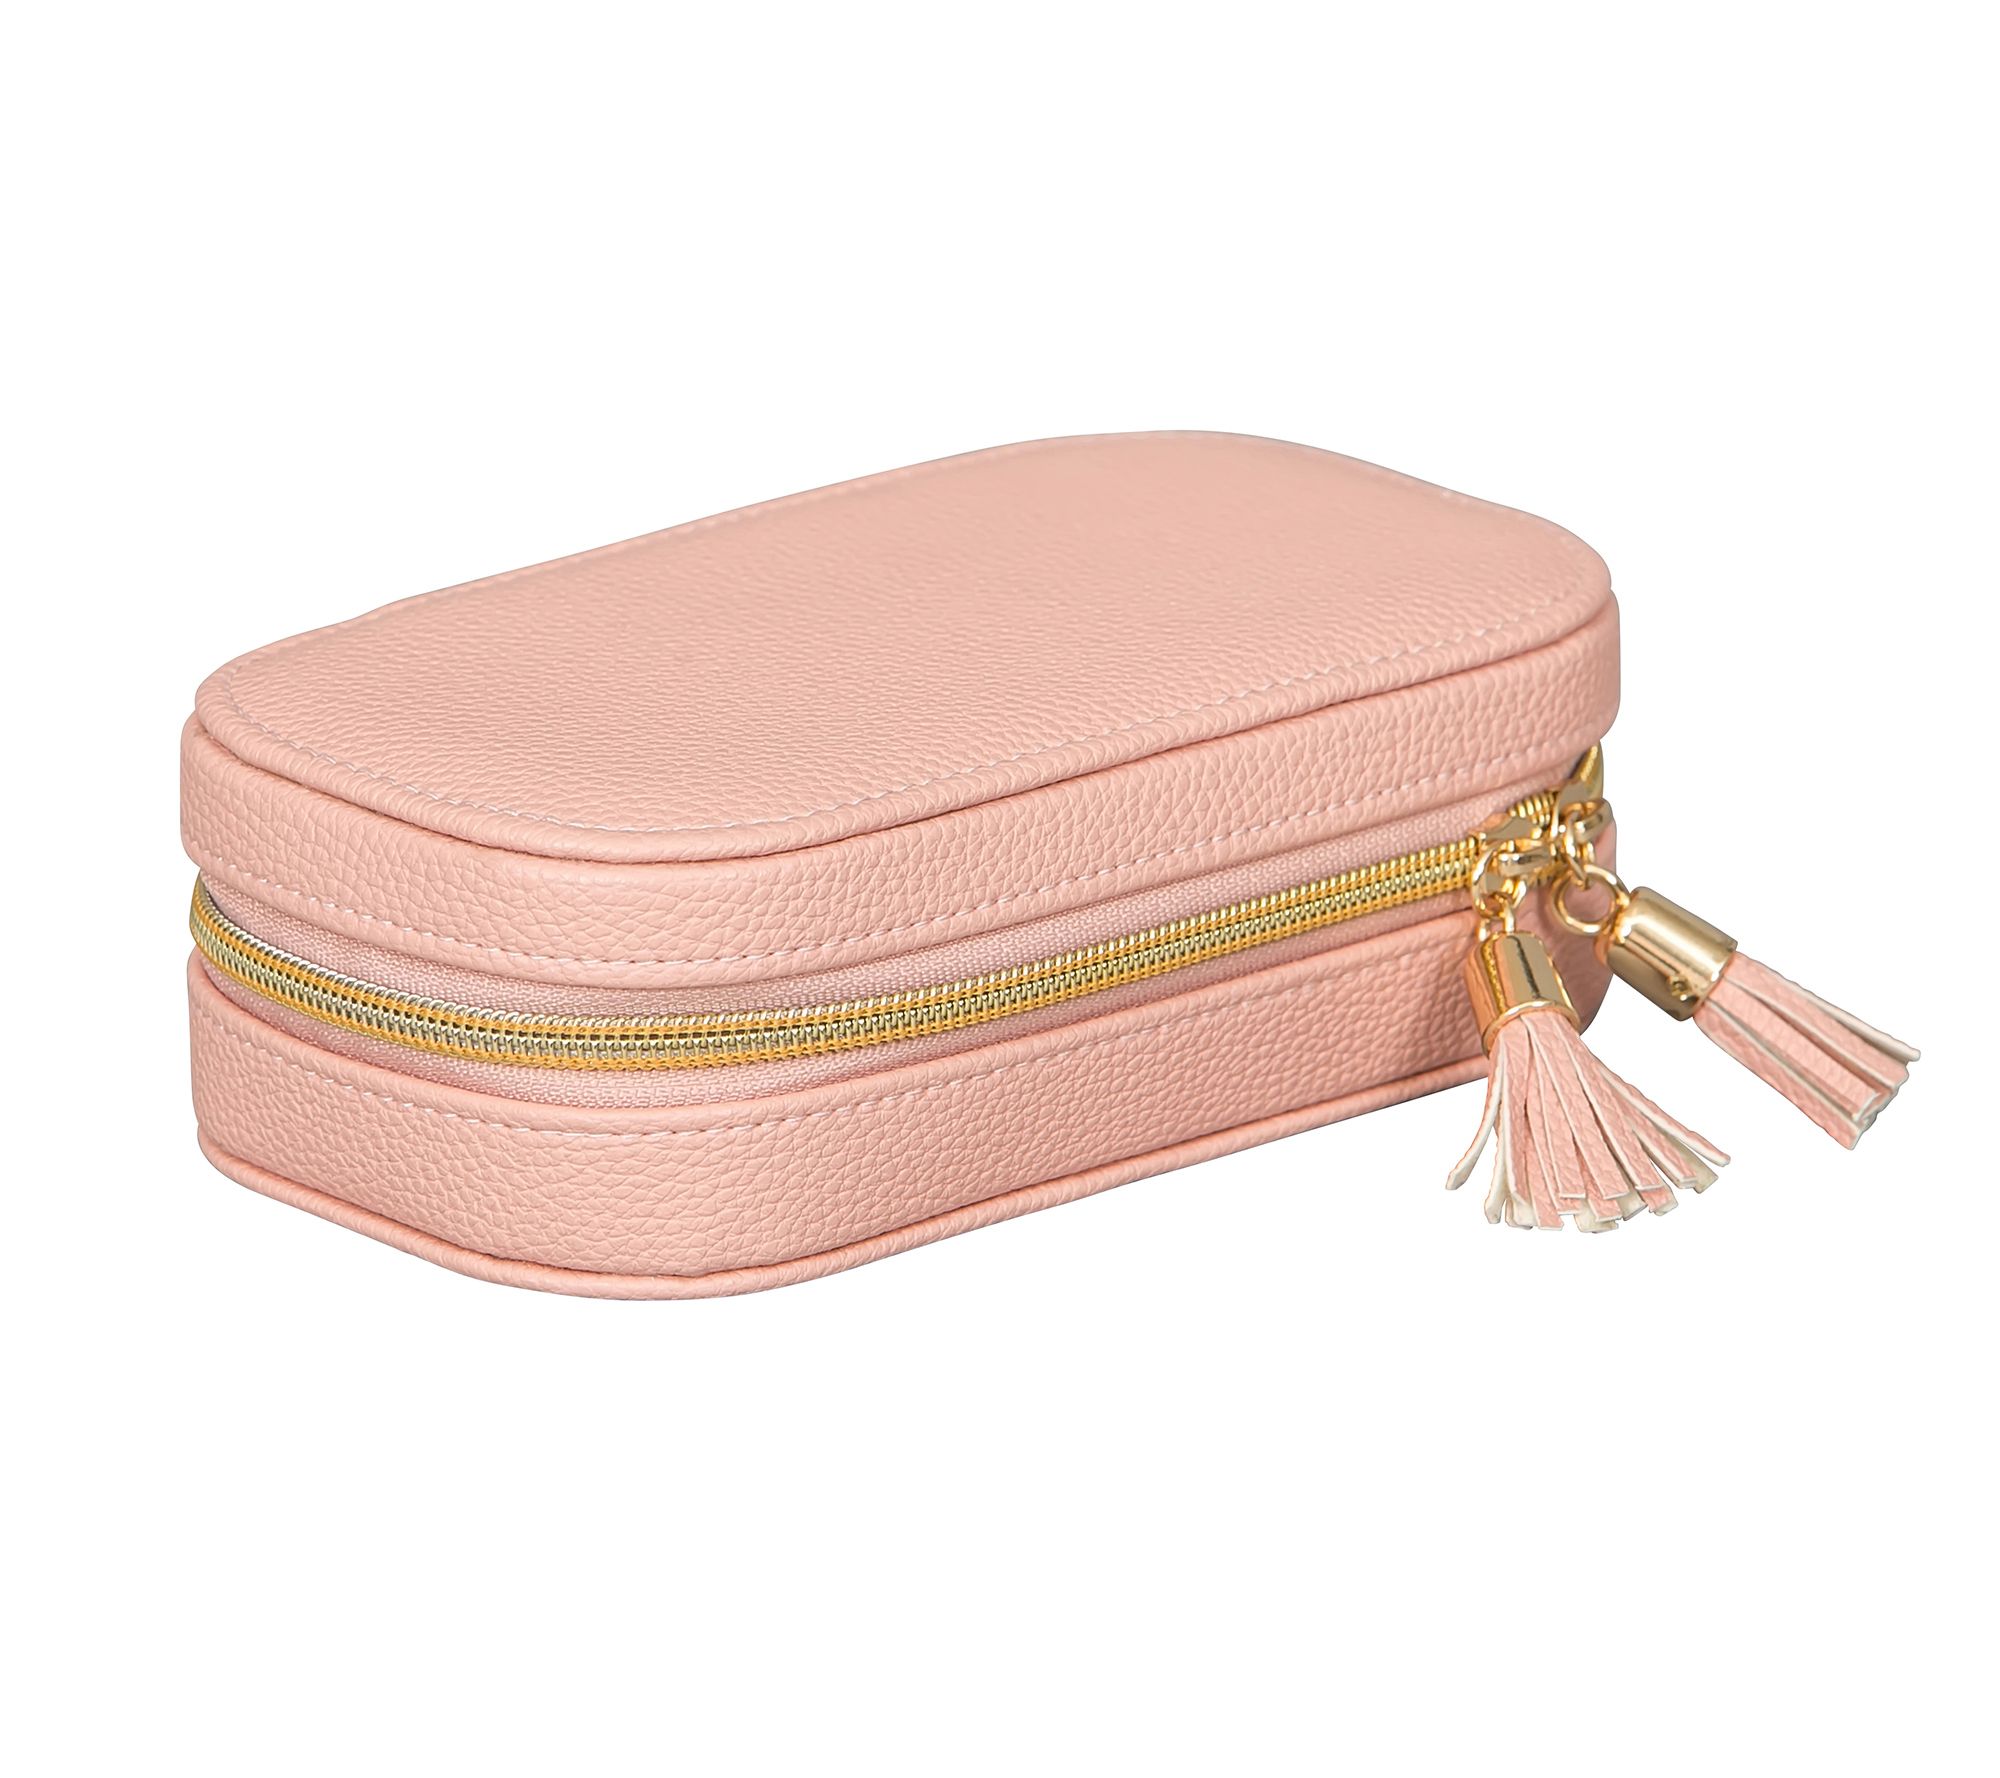 Mele & Co. Lucy Travel Jewelry Case in Pink Faux Leather - QVC.com